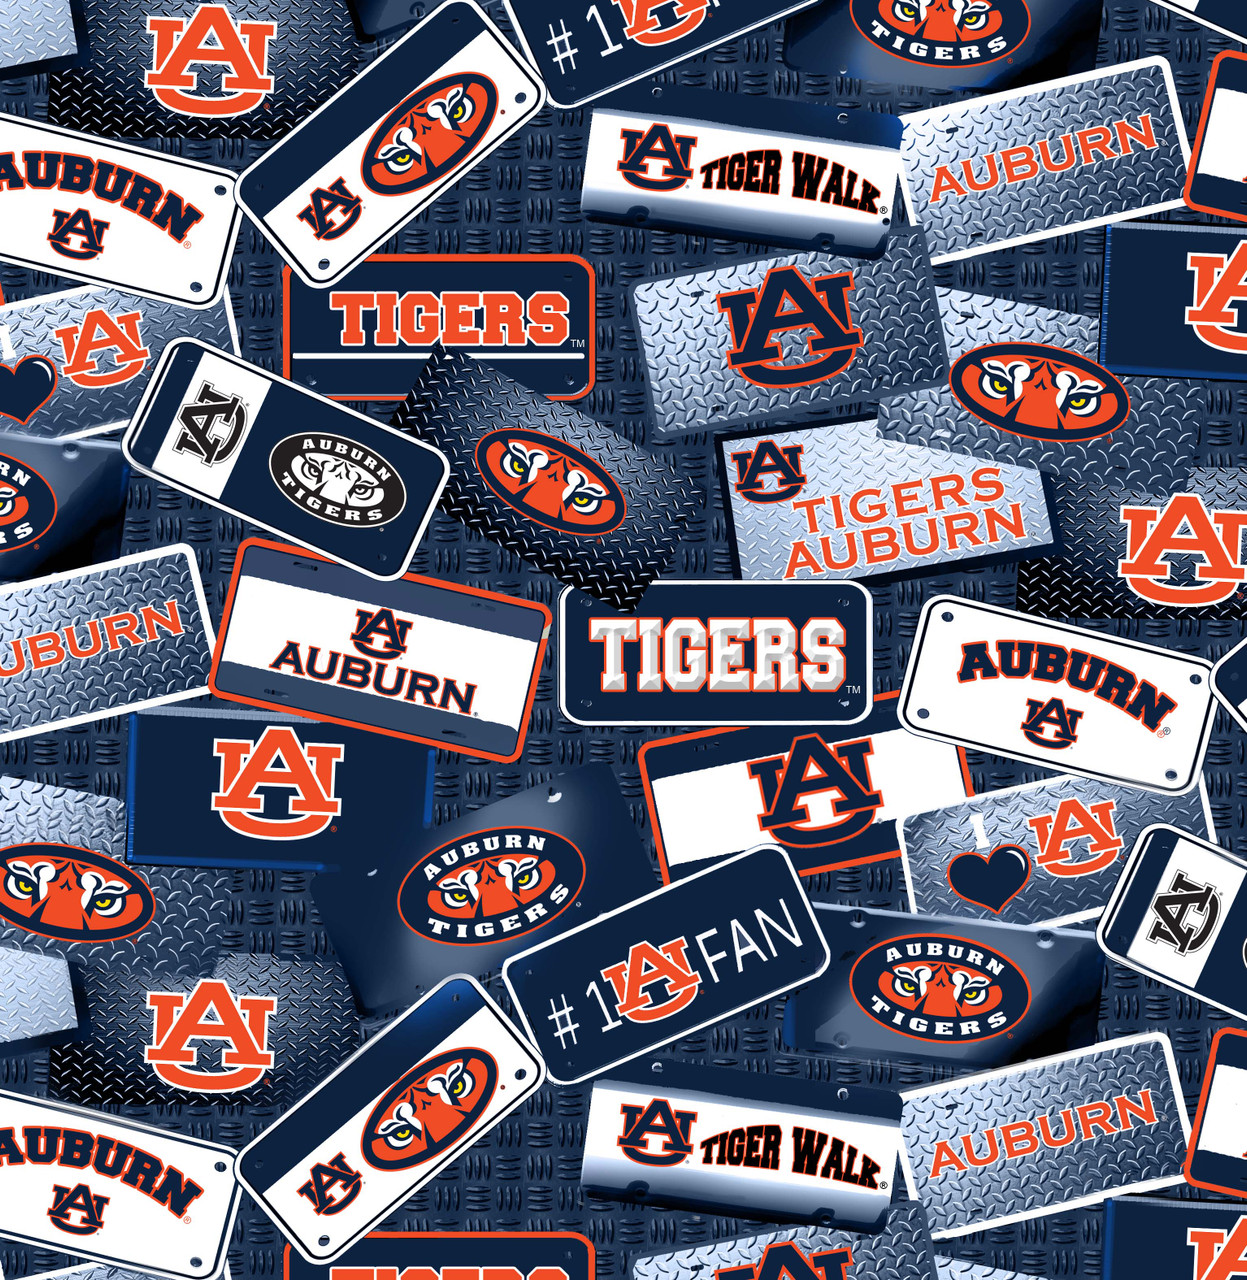 Auburn University Tigers Cotton Fabric with License Plate Print or Matching Solid Cotton Fabrics